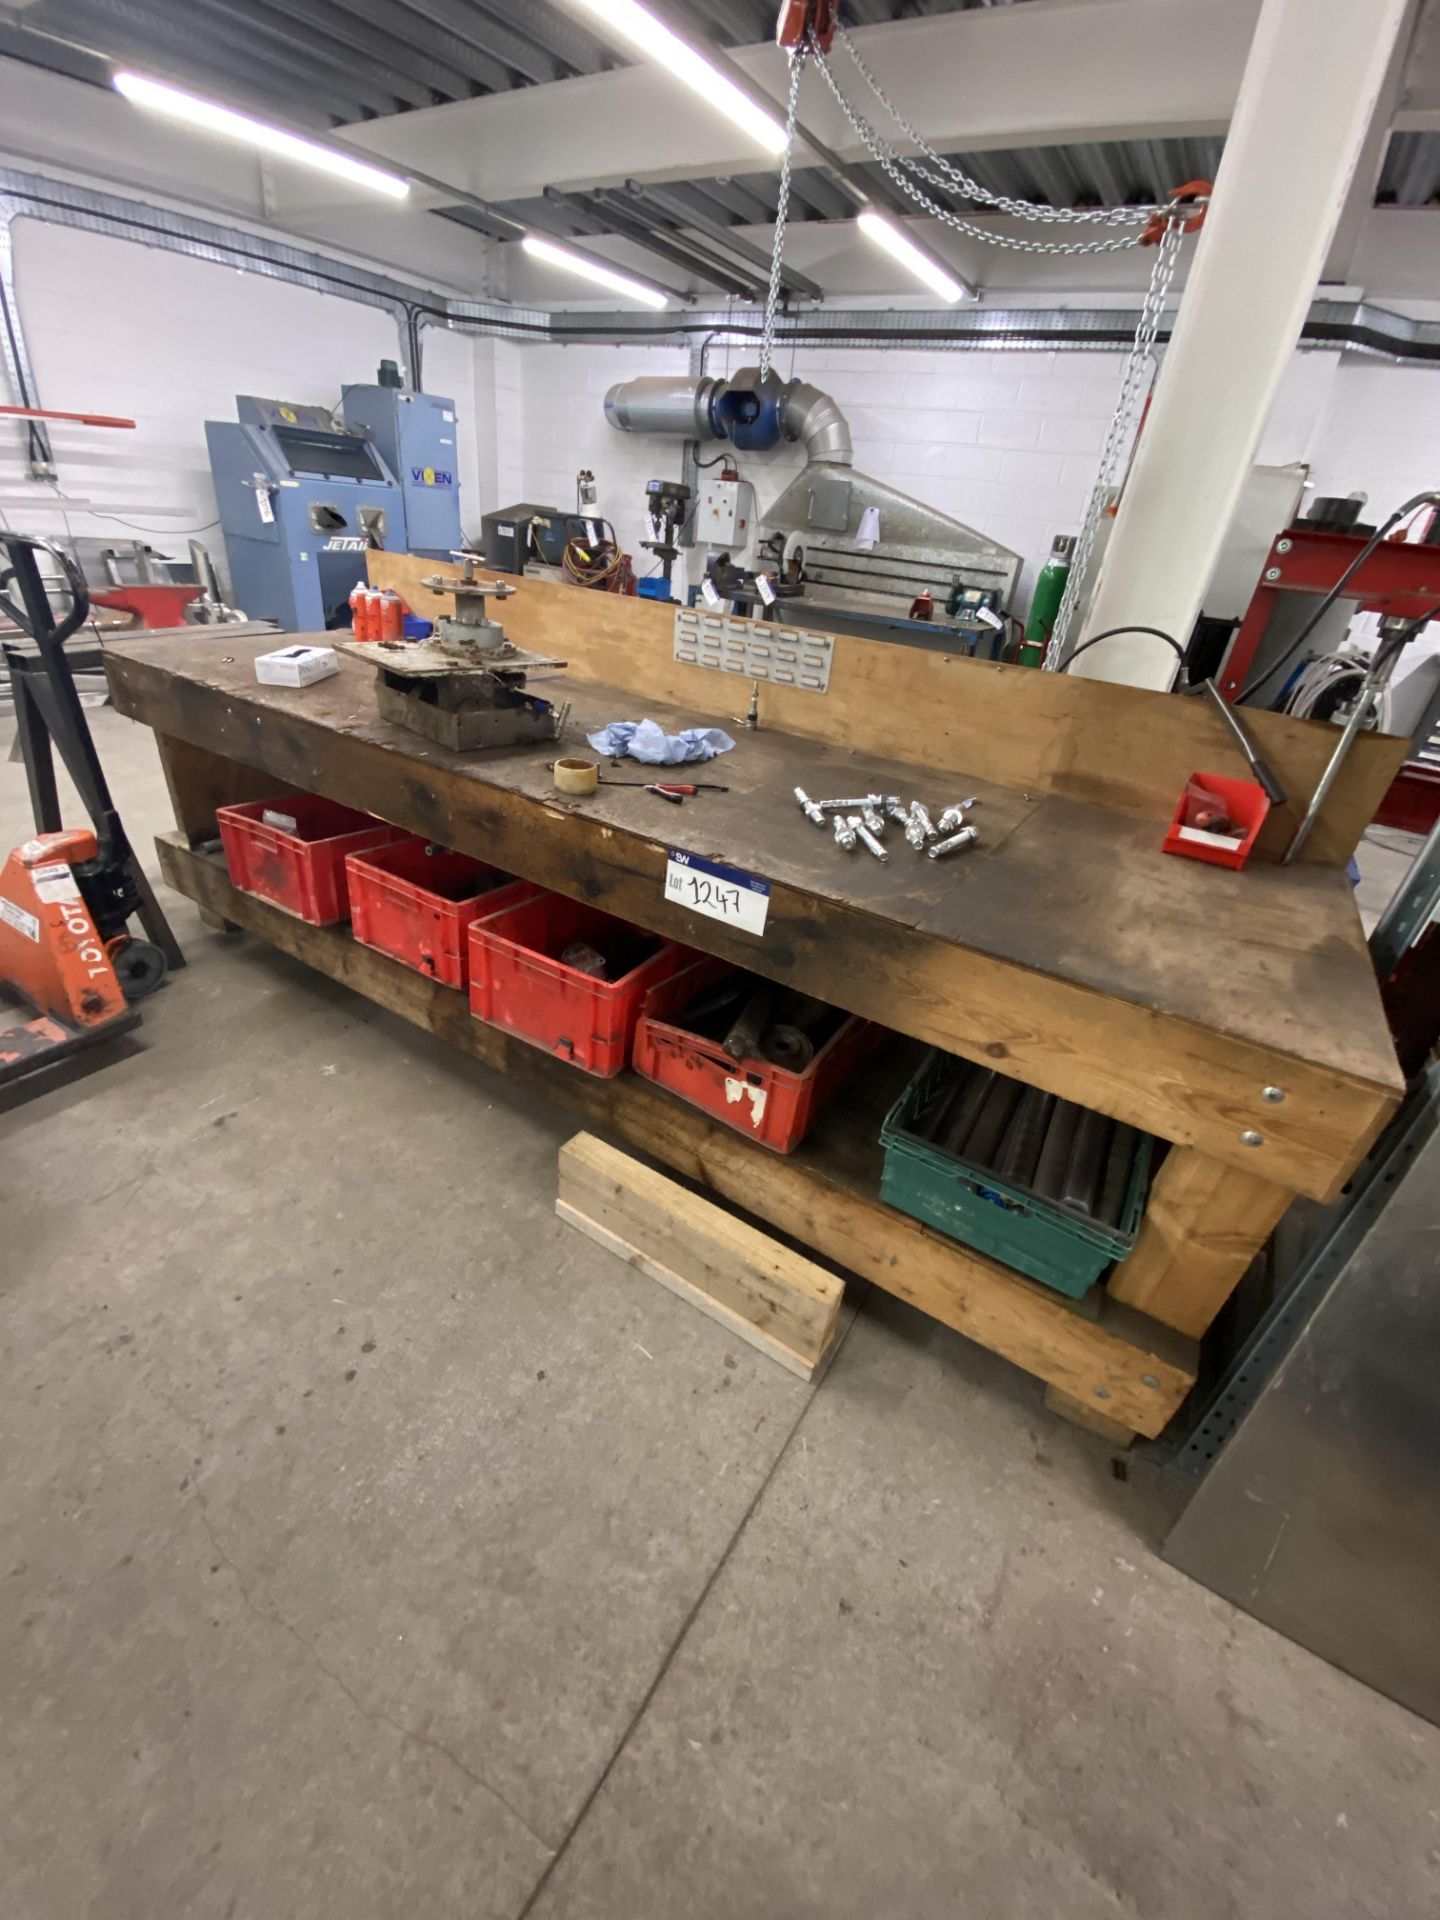 Timber Workshop Bench, approx. 3.05m x 900mm, with contents under bench including rollers, spares